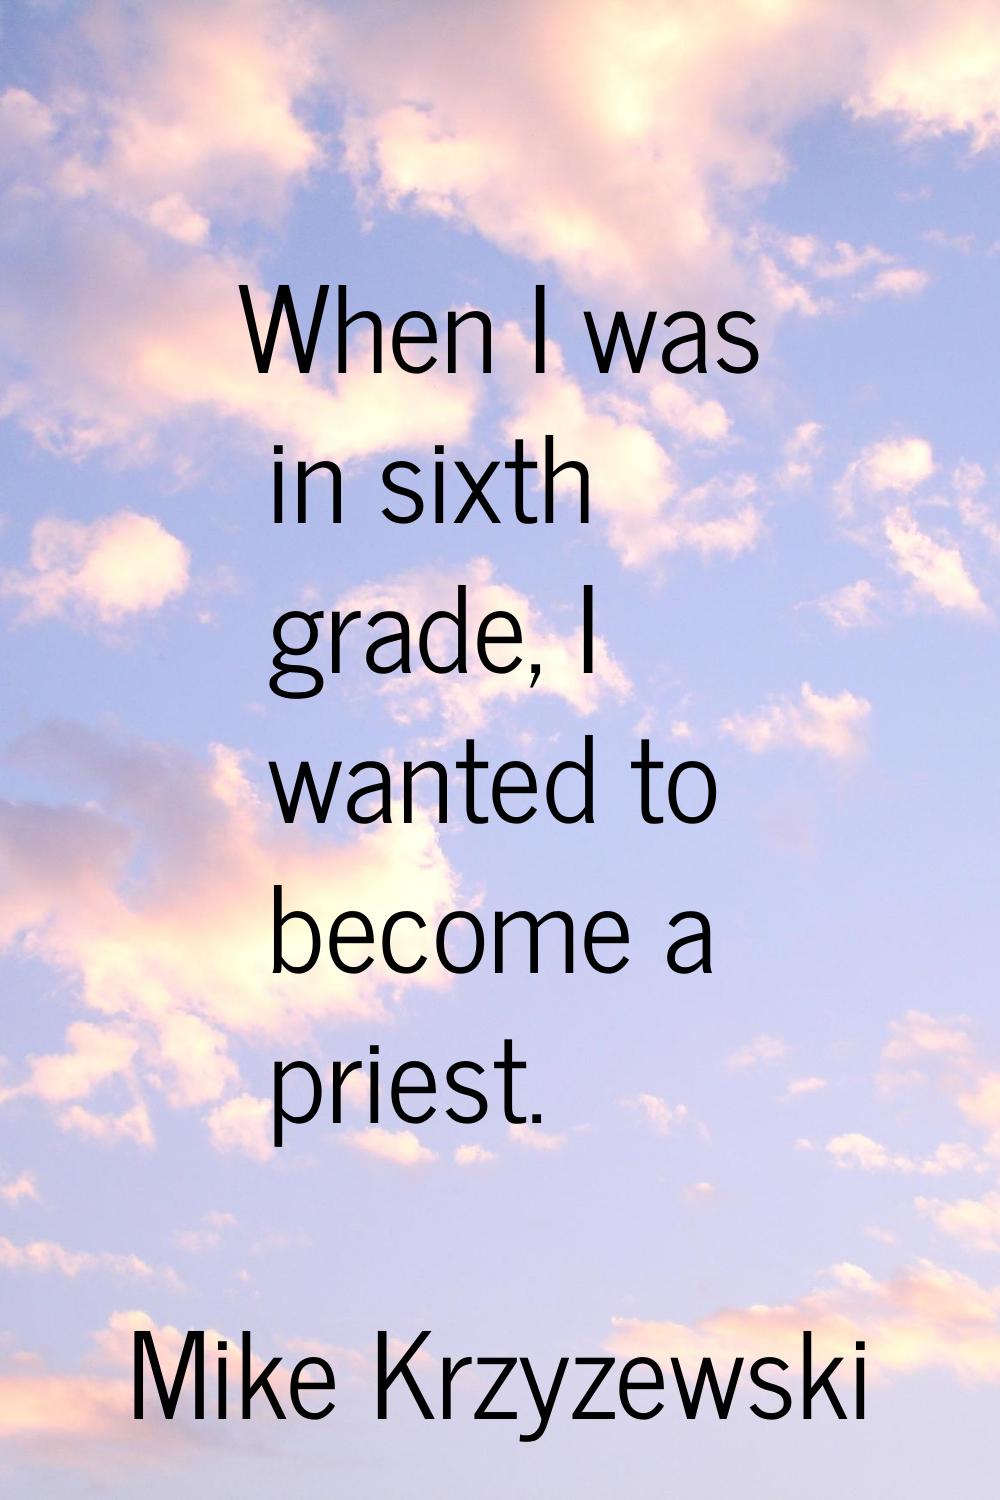 When I was in sixth grade, I wanted to become a priest.